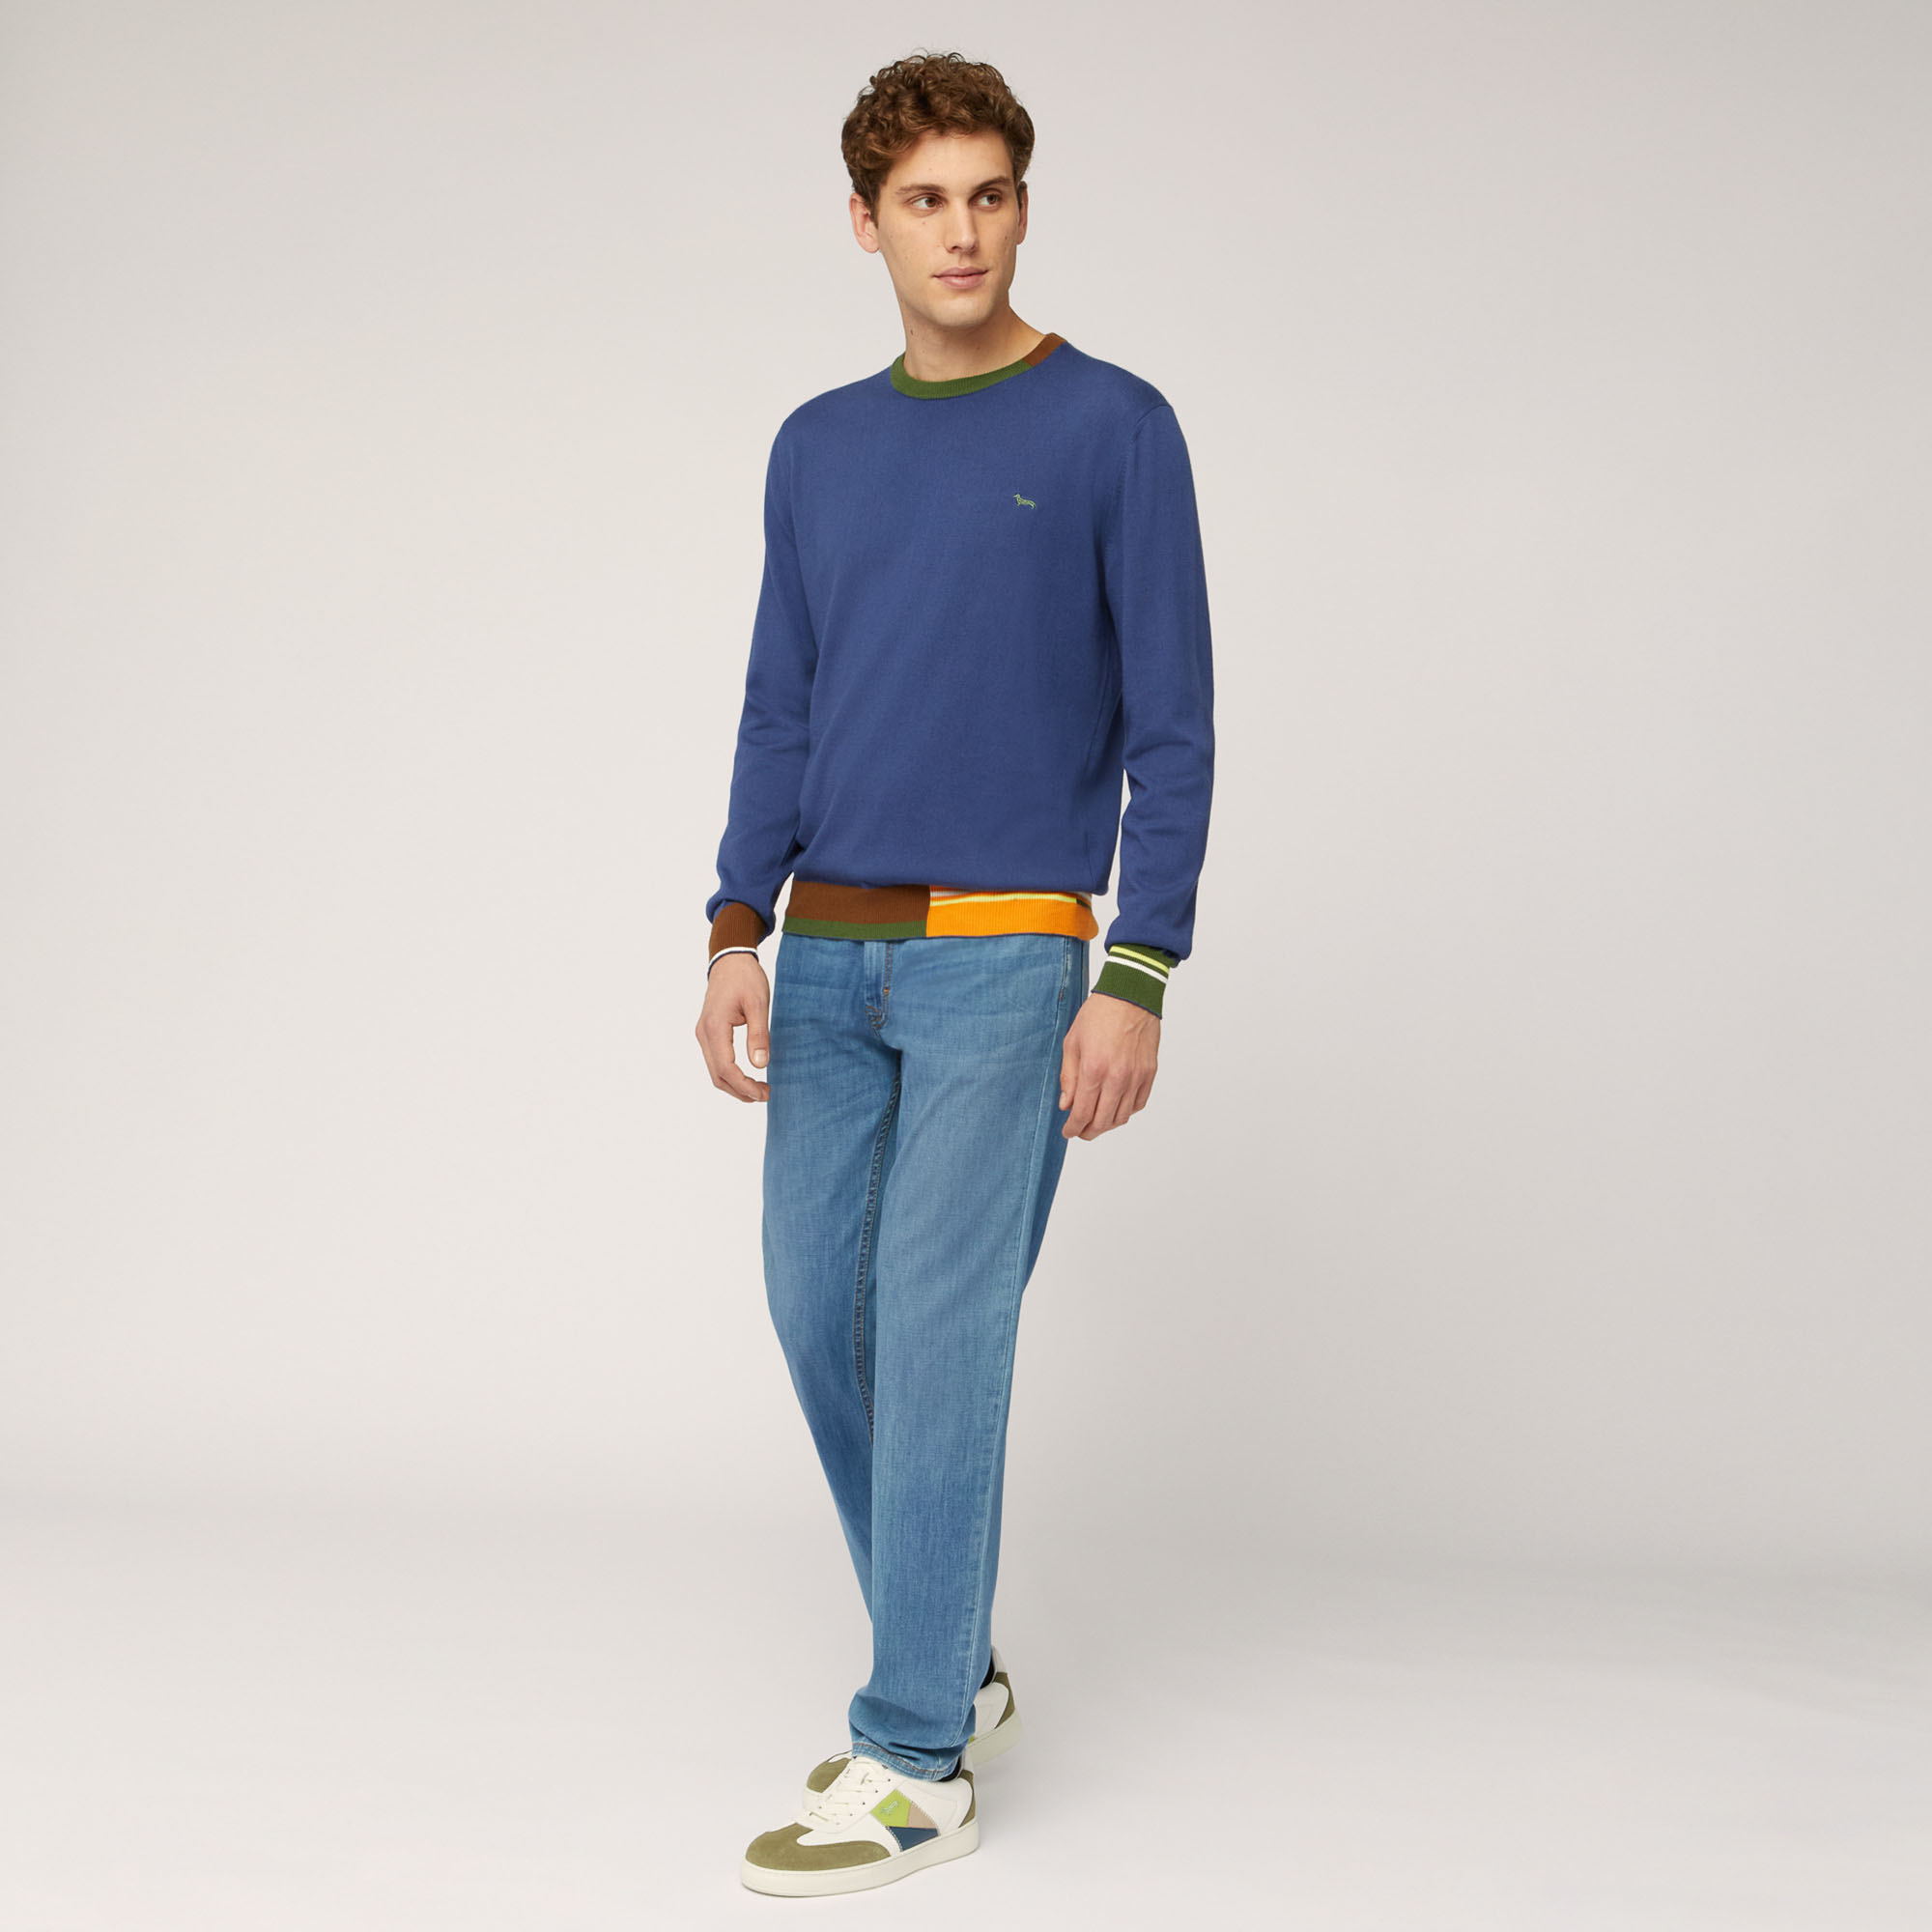 Organic Cotton Crew Neck Pullover with Color Block Details, Blue, large image number 3